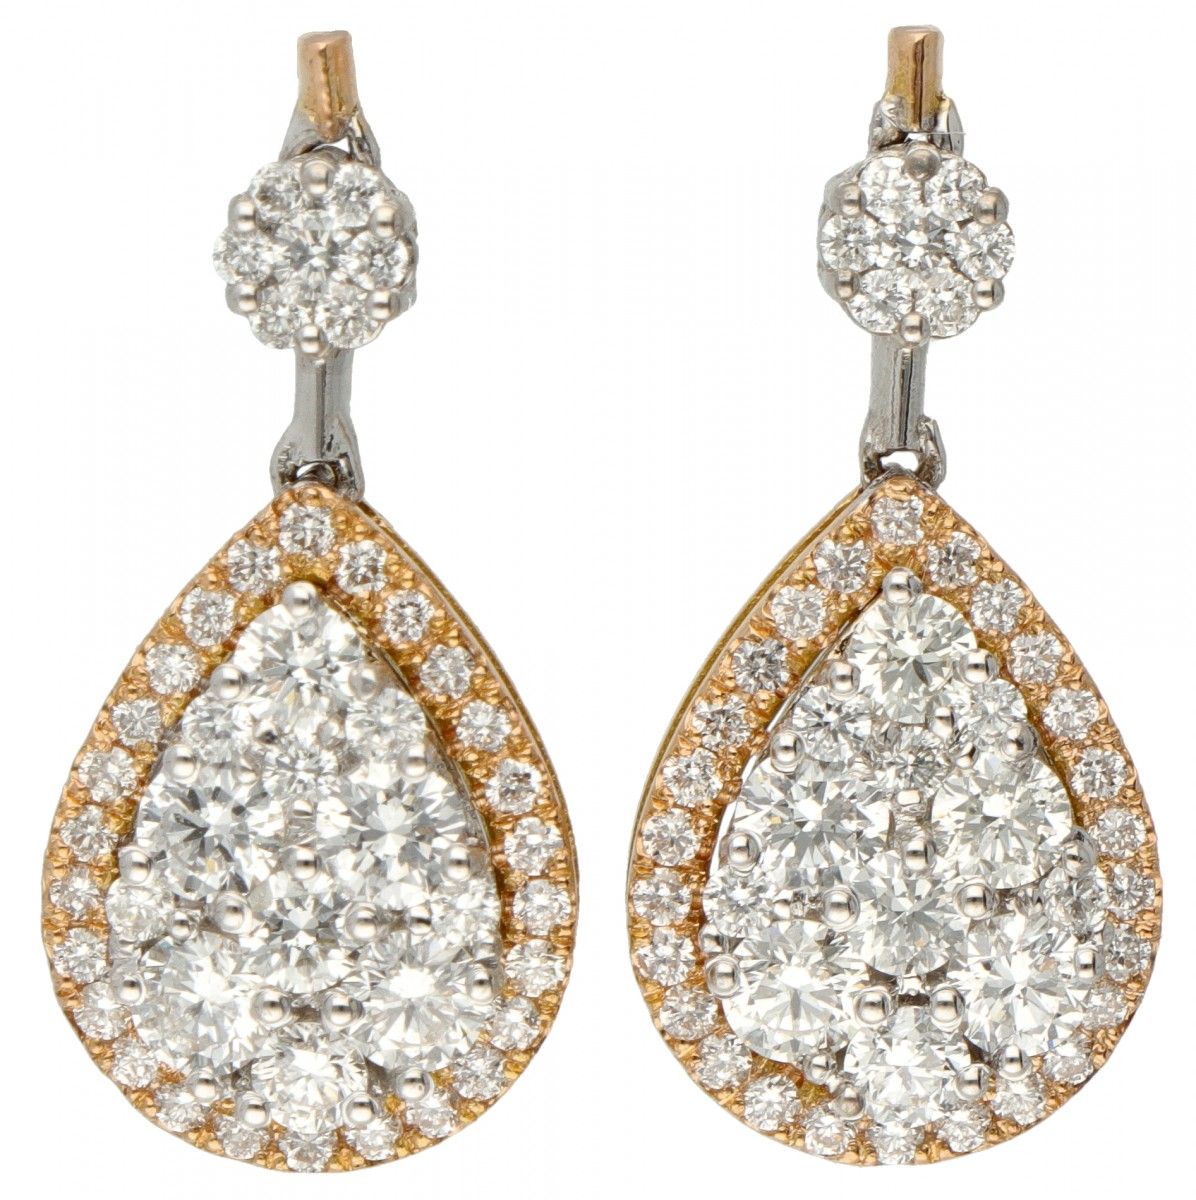 18K. Bicolor gold entourage earrings set with approx. 1.54 ct. Diamond. 印章：750。镶&hellip;